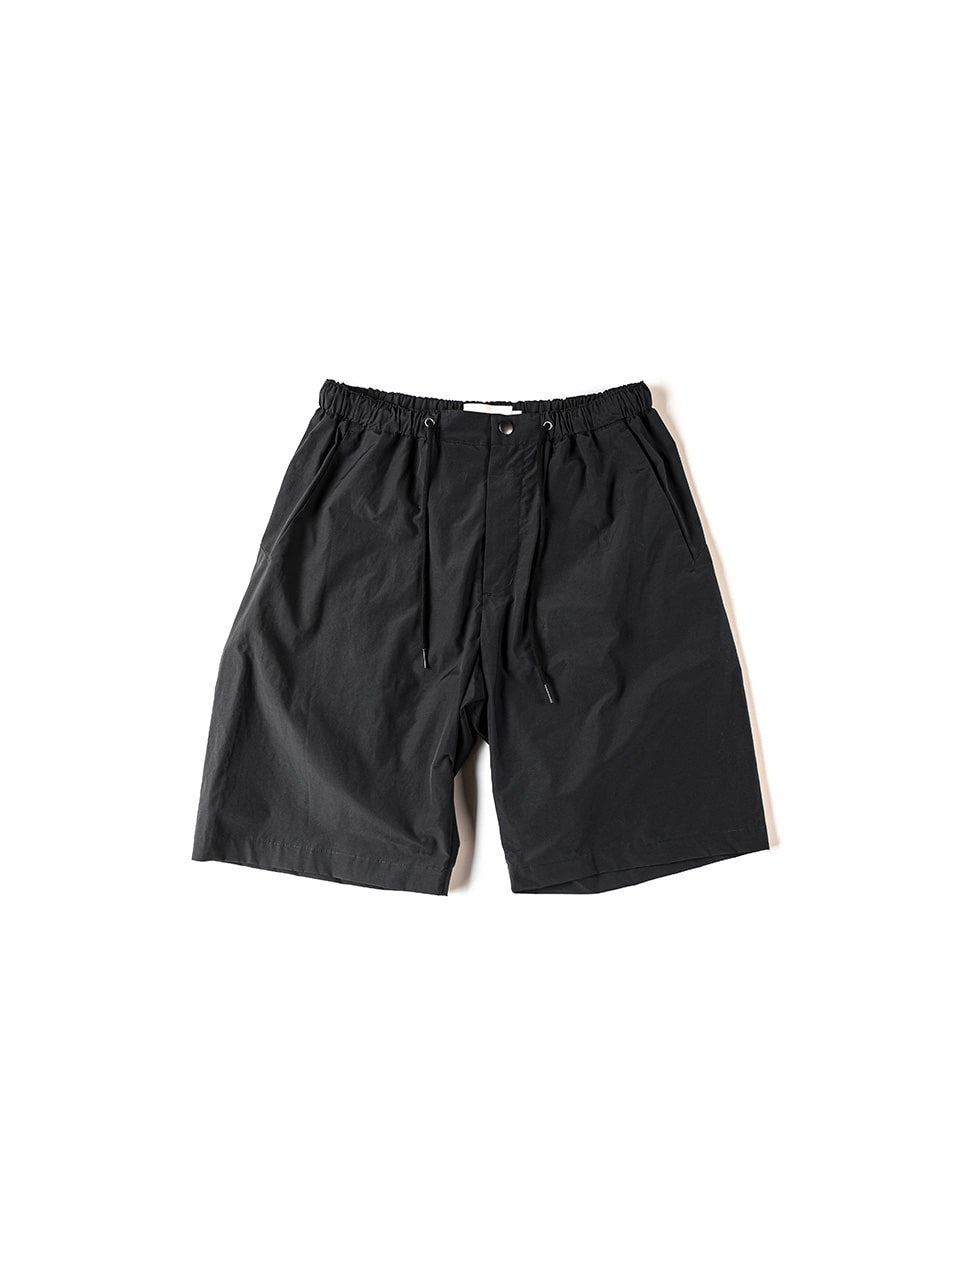 [Ourselves] PACKABLE TRAVELLER SHORTS (Charcoal)